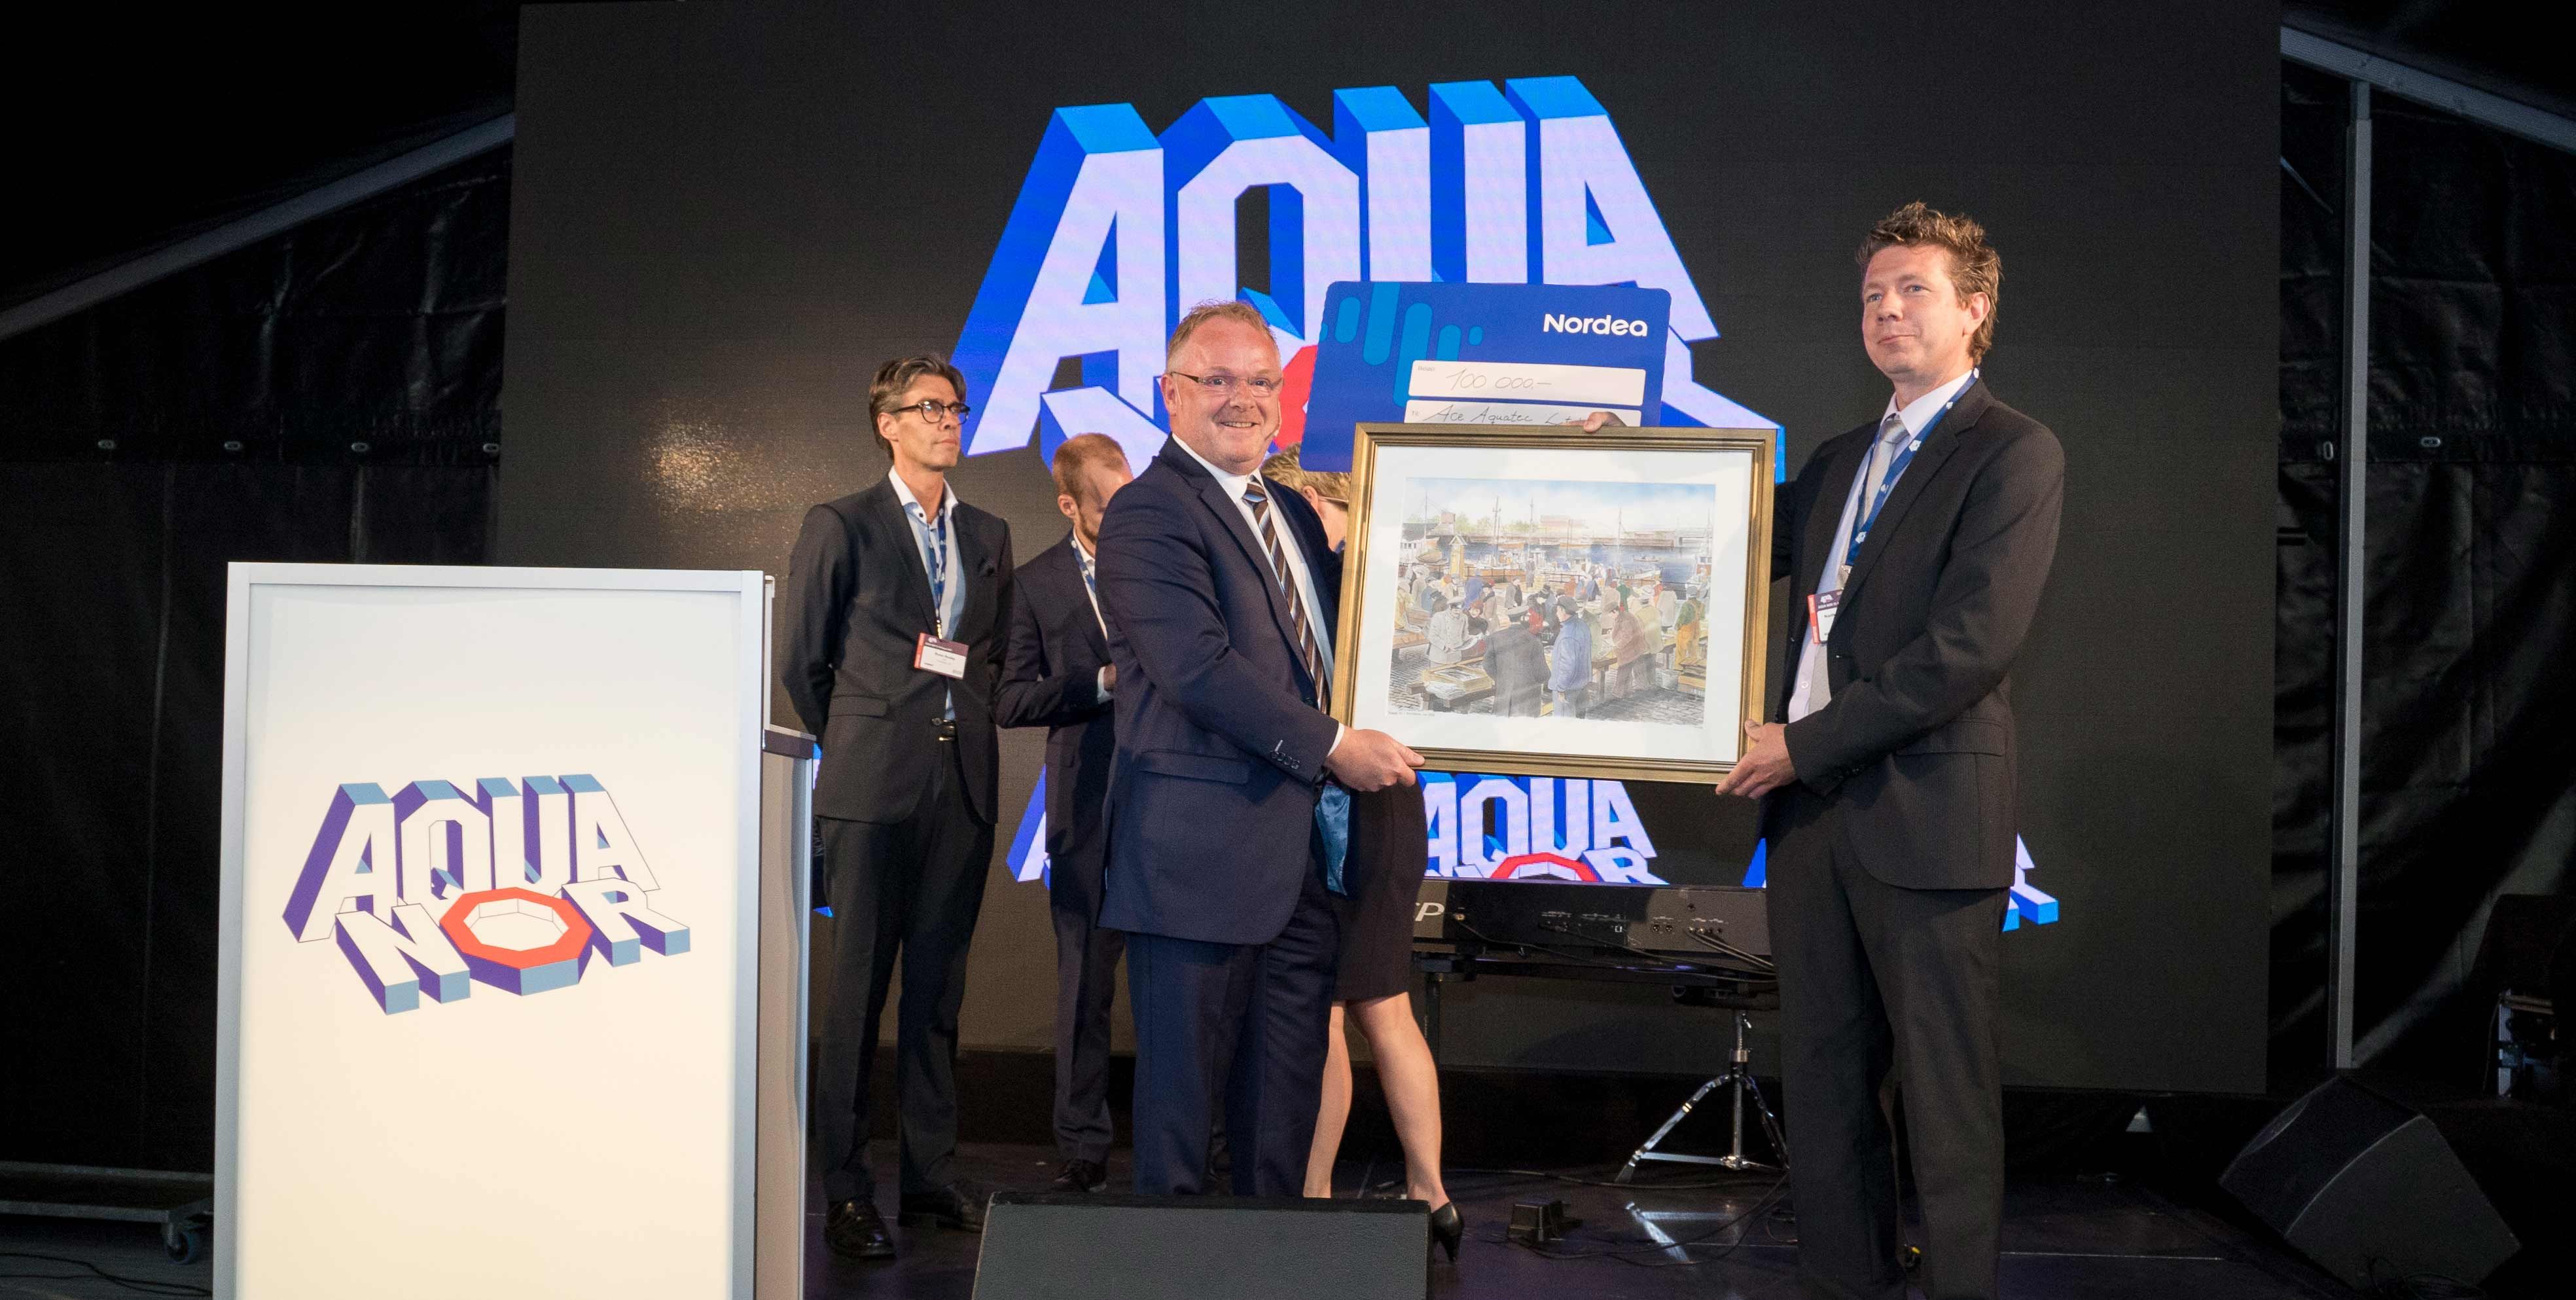 Ace Aquatec's Nathan Pyne-Carter collects the Innovation Award at Aqua Nor 2017 from then fisheries minister Per Sandberg 